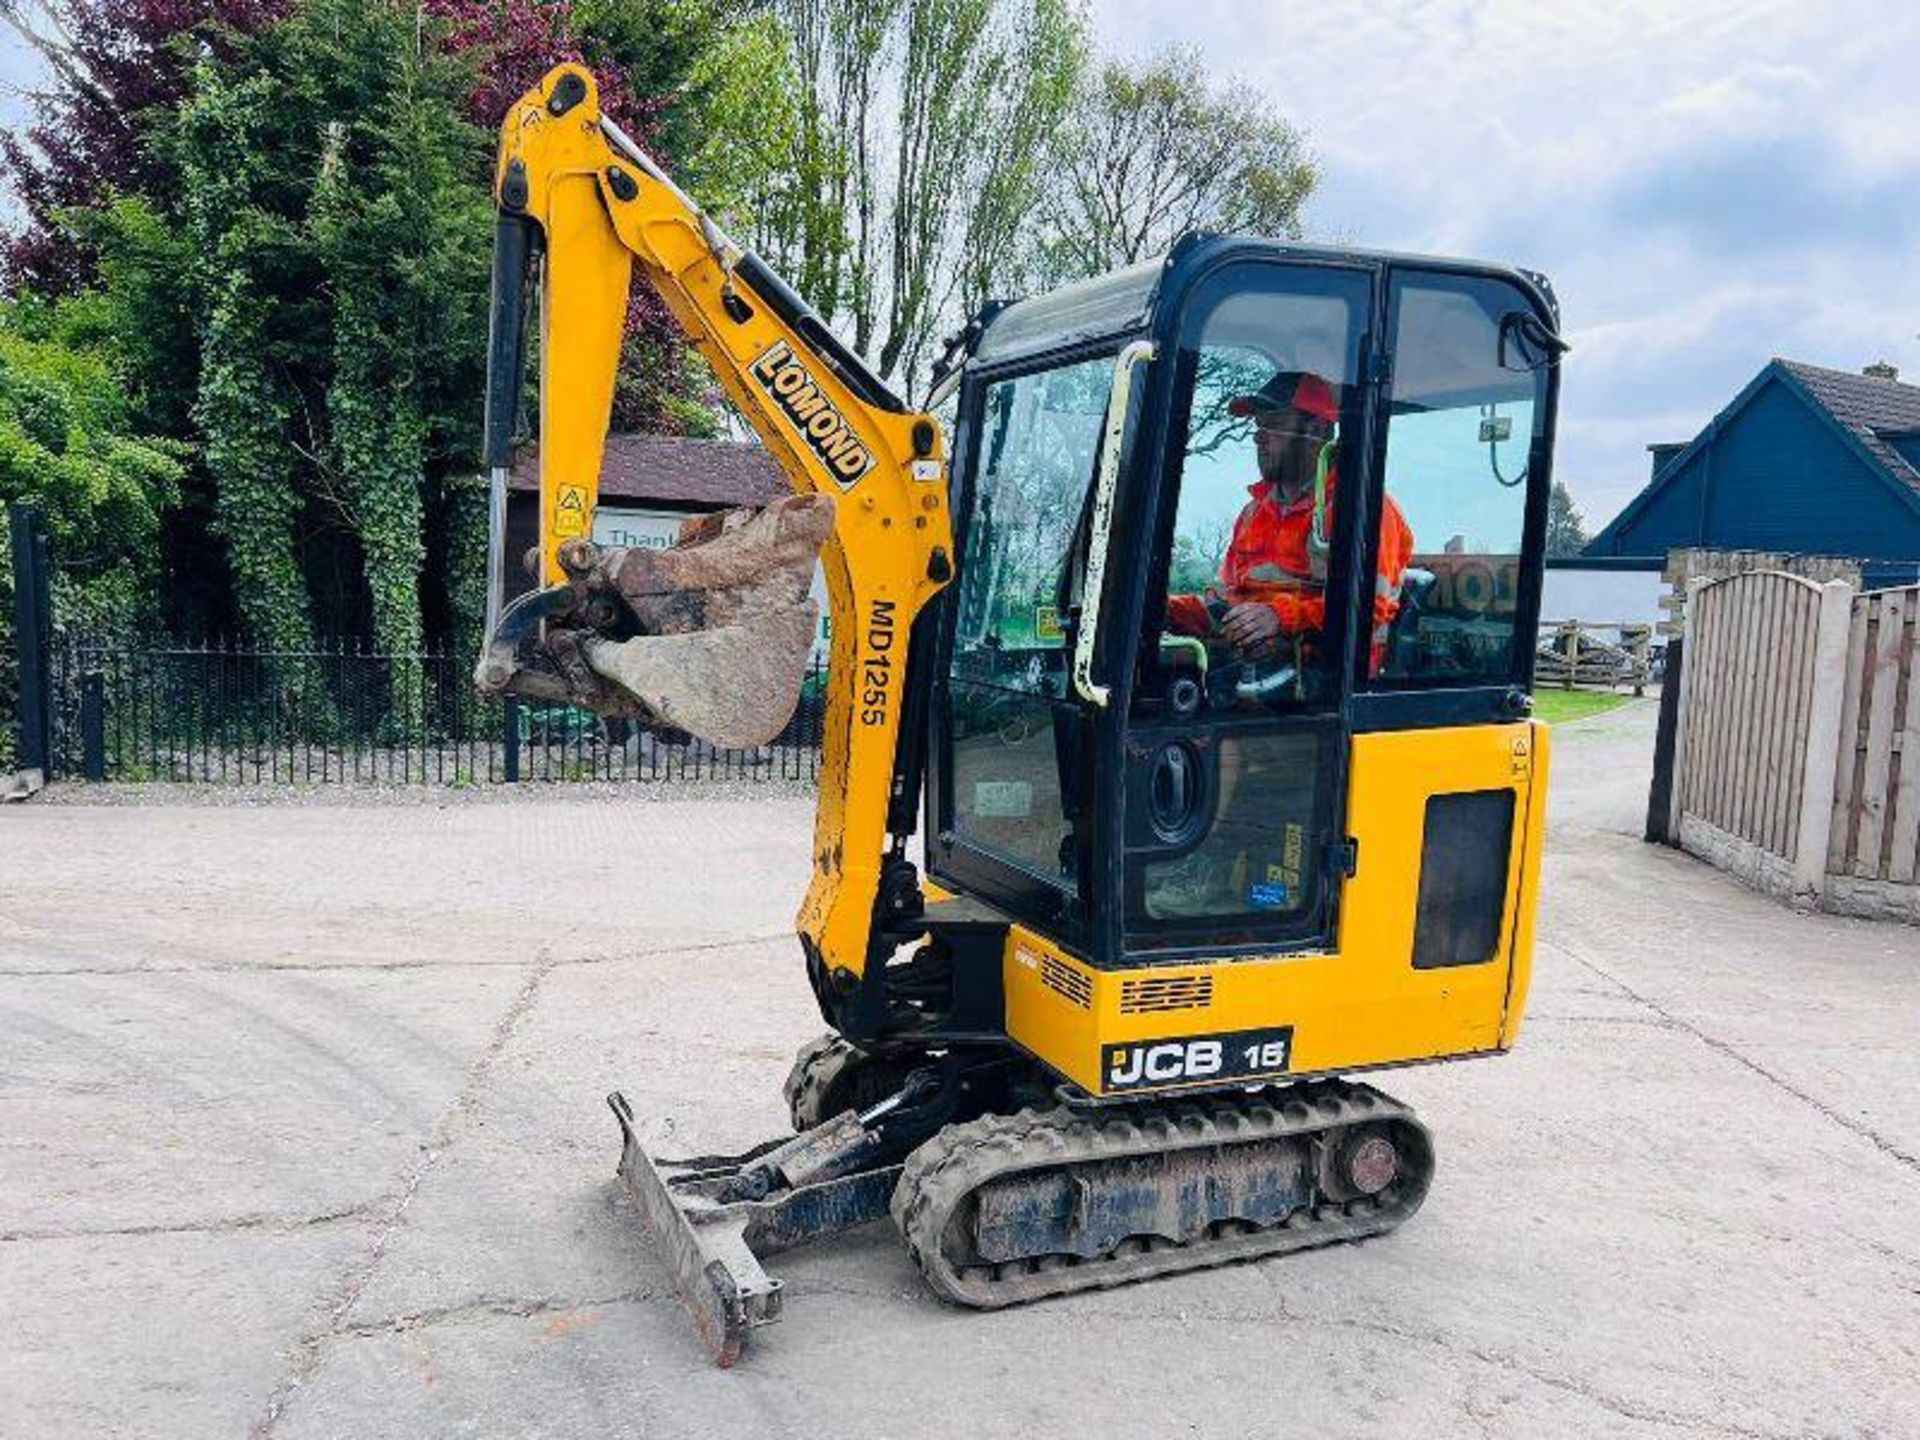 JCB 15 TRACKED EXCAVATOR *YEAR 2018 , CHOICE OF 2* C/W 3 X BUCKETS - Image 8 of 19